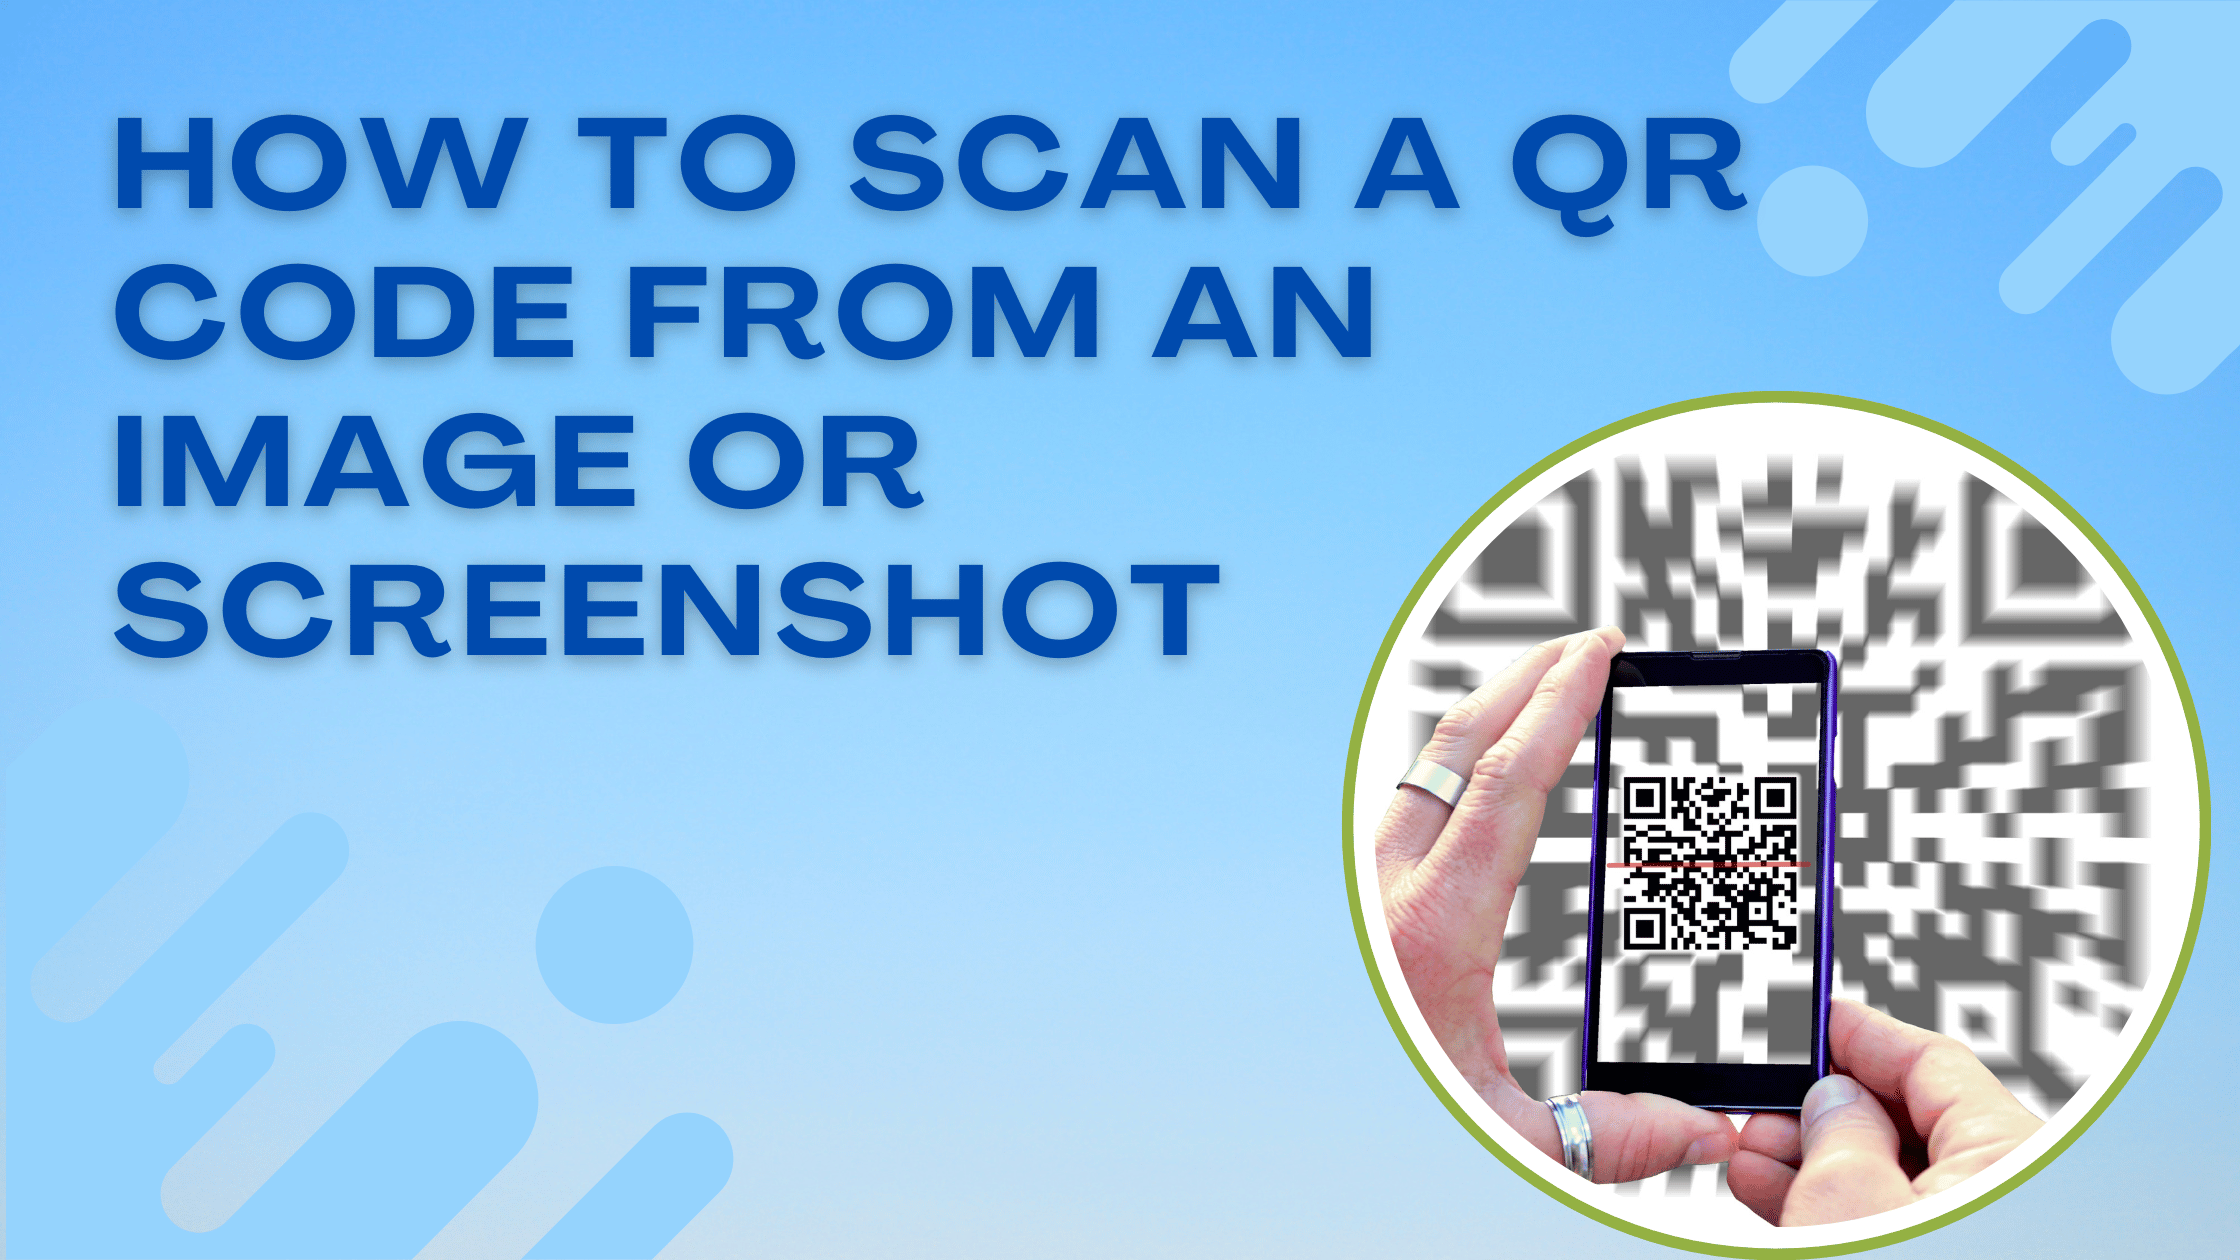 How to scan a QR code from an image or screenshot